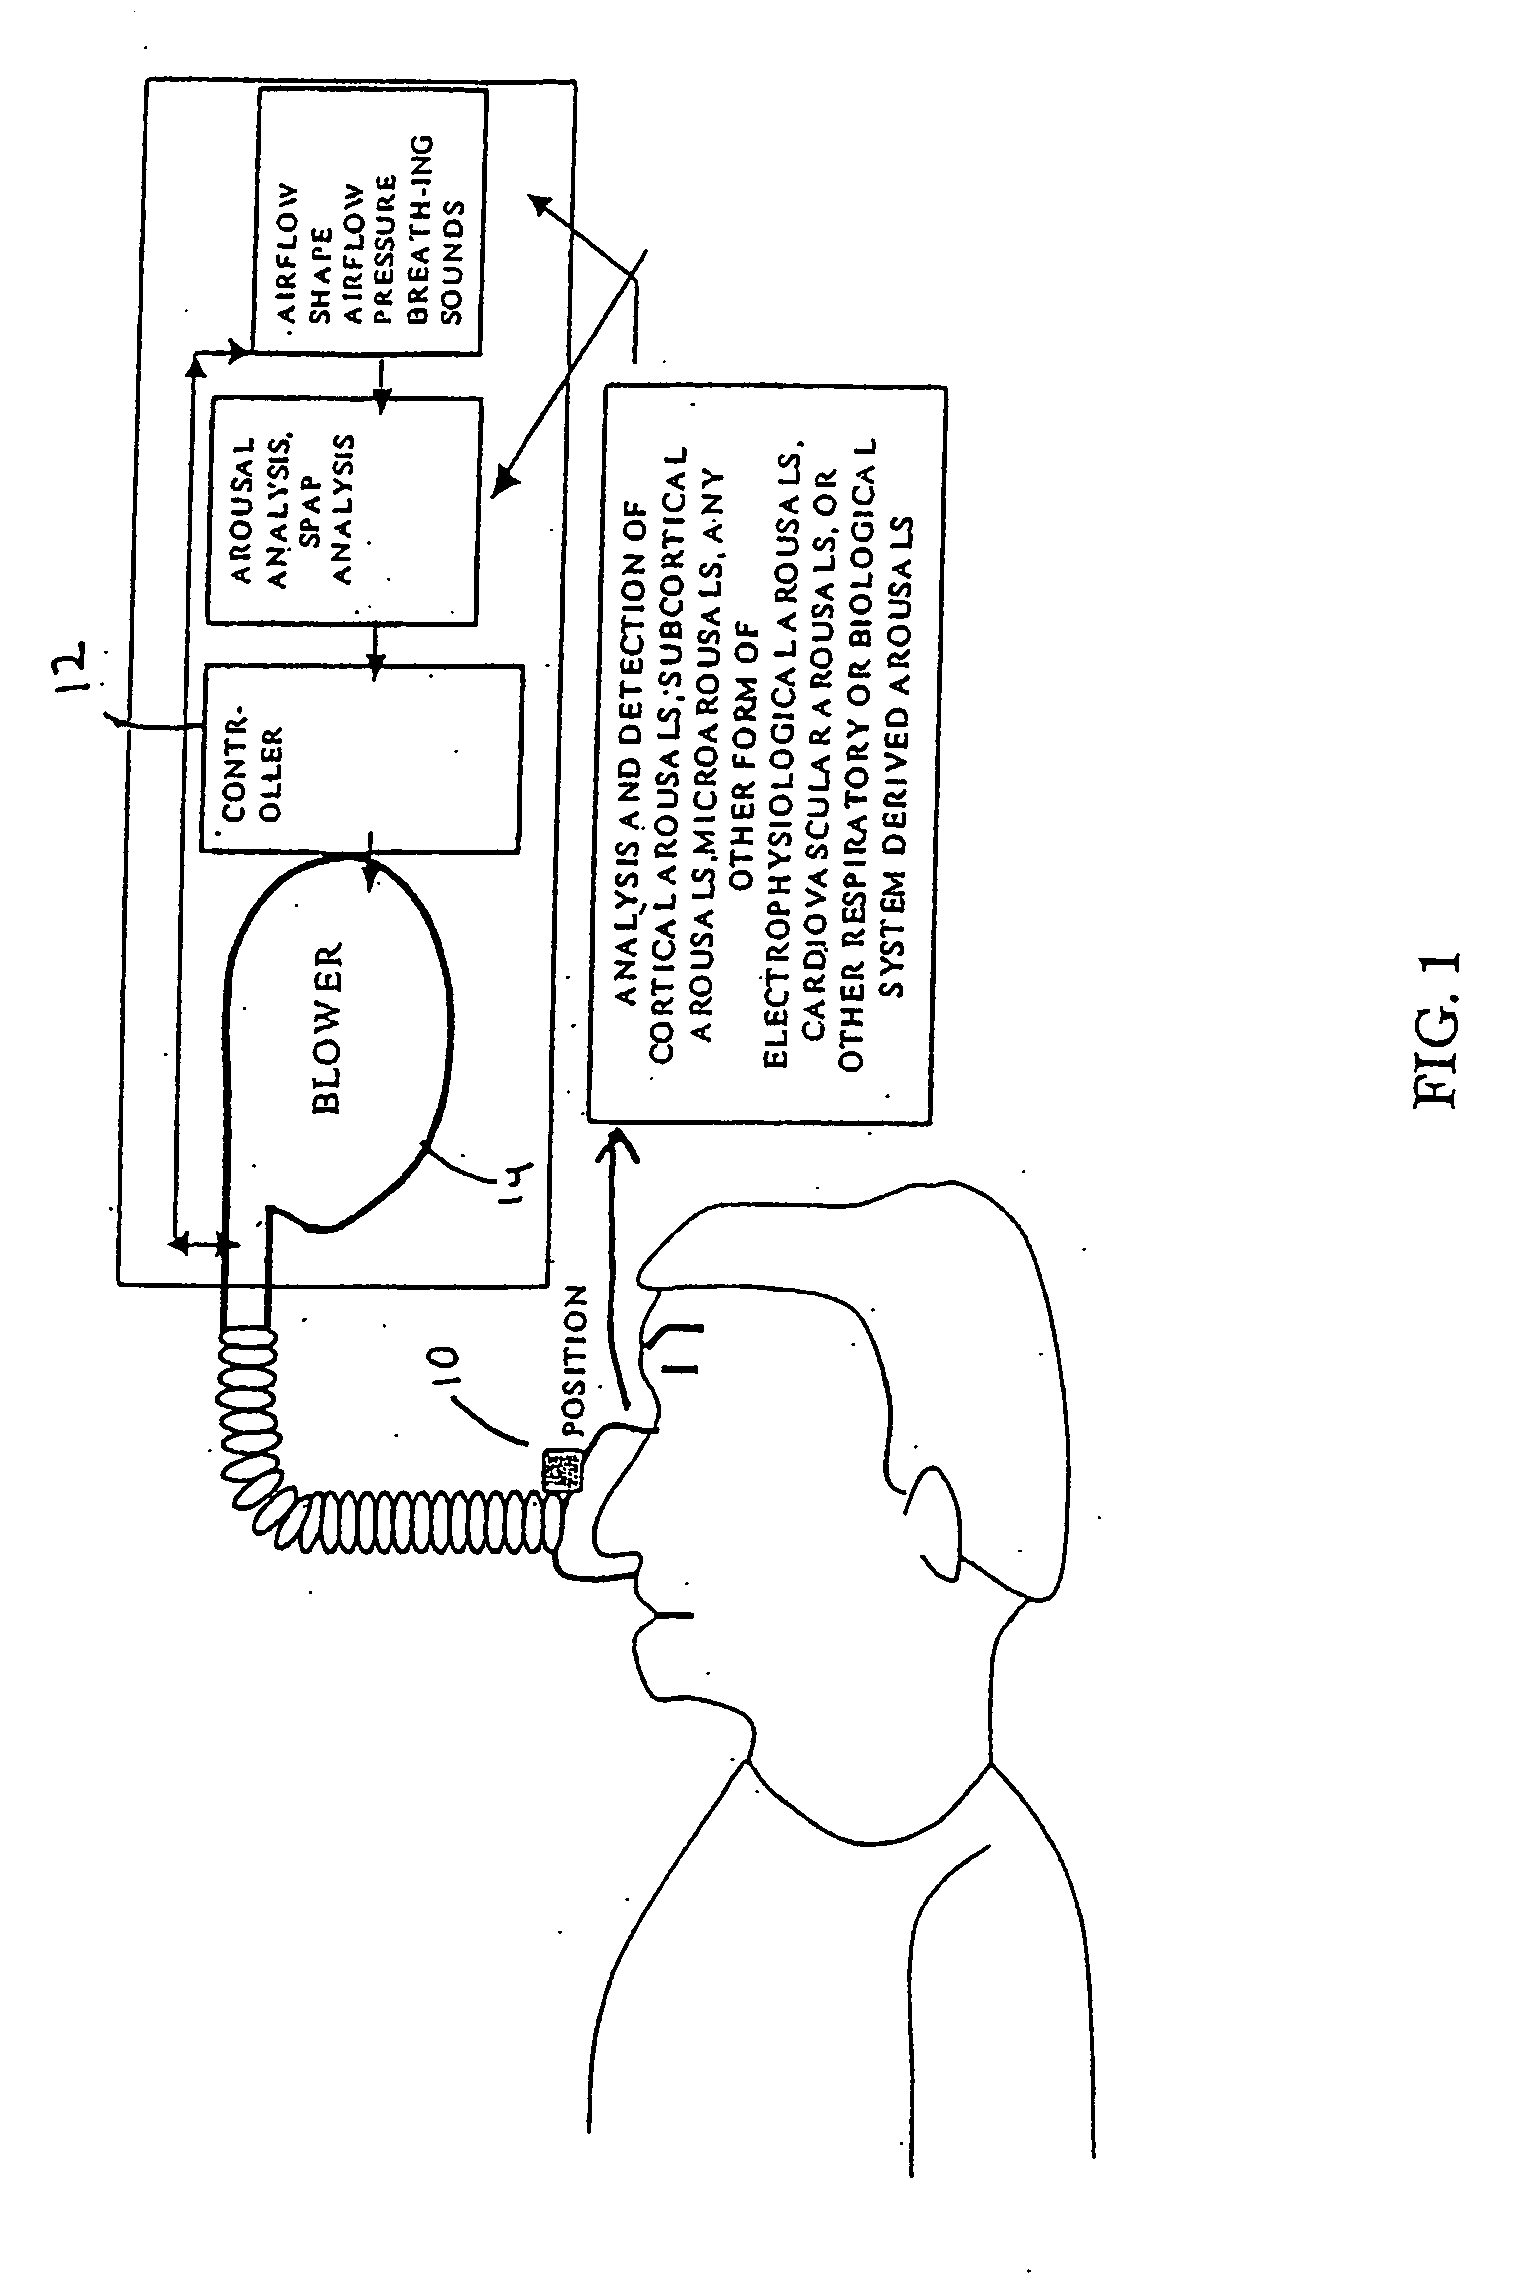 Method and apparatus for maintaining and monitoring sleep quality during therapeutic treatments